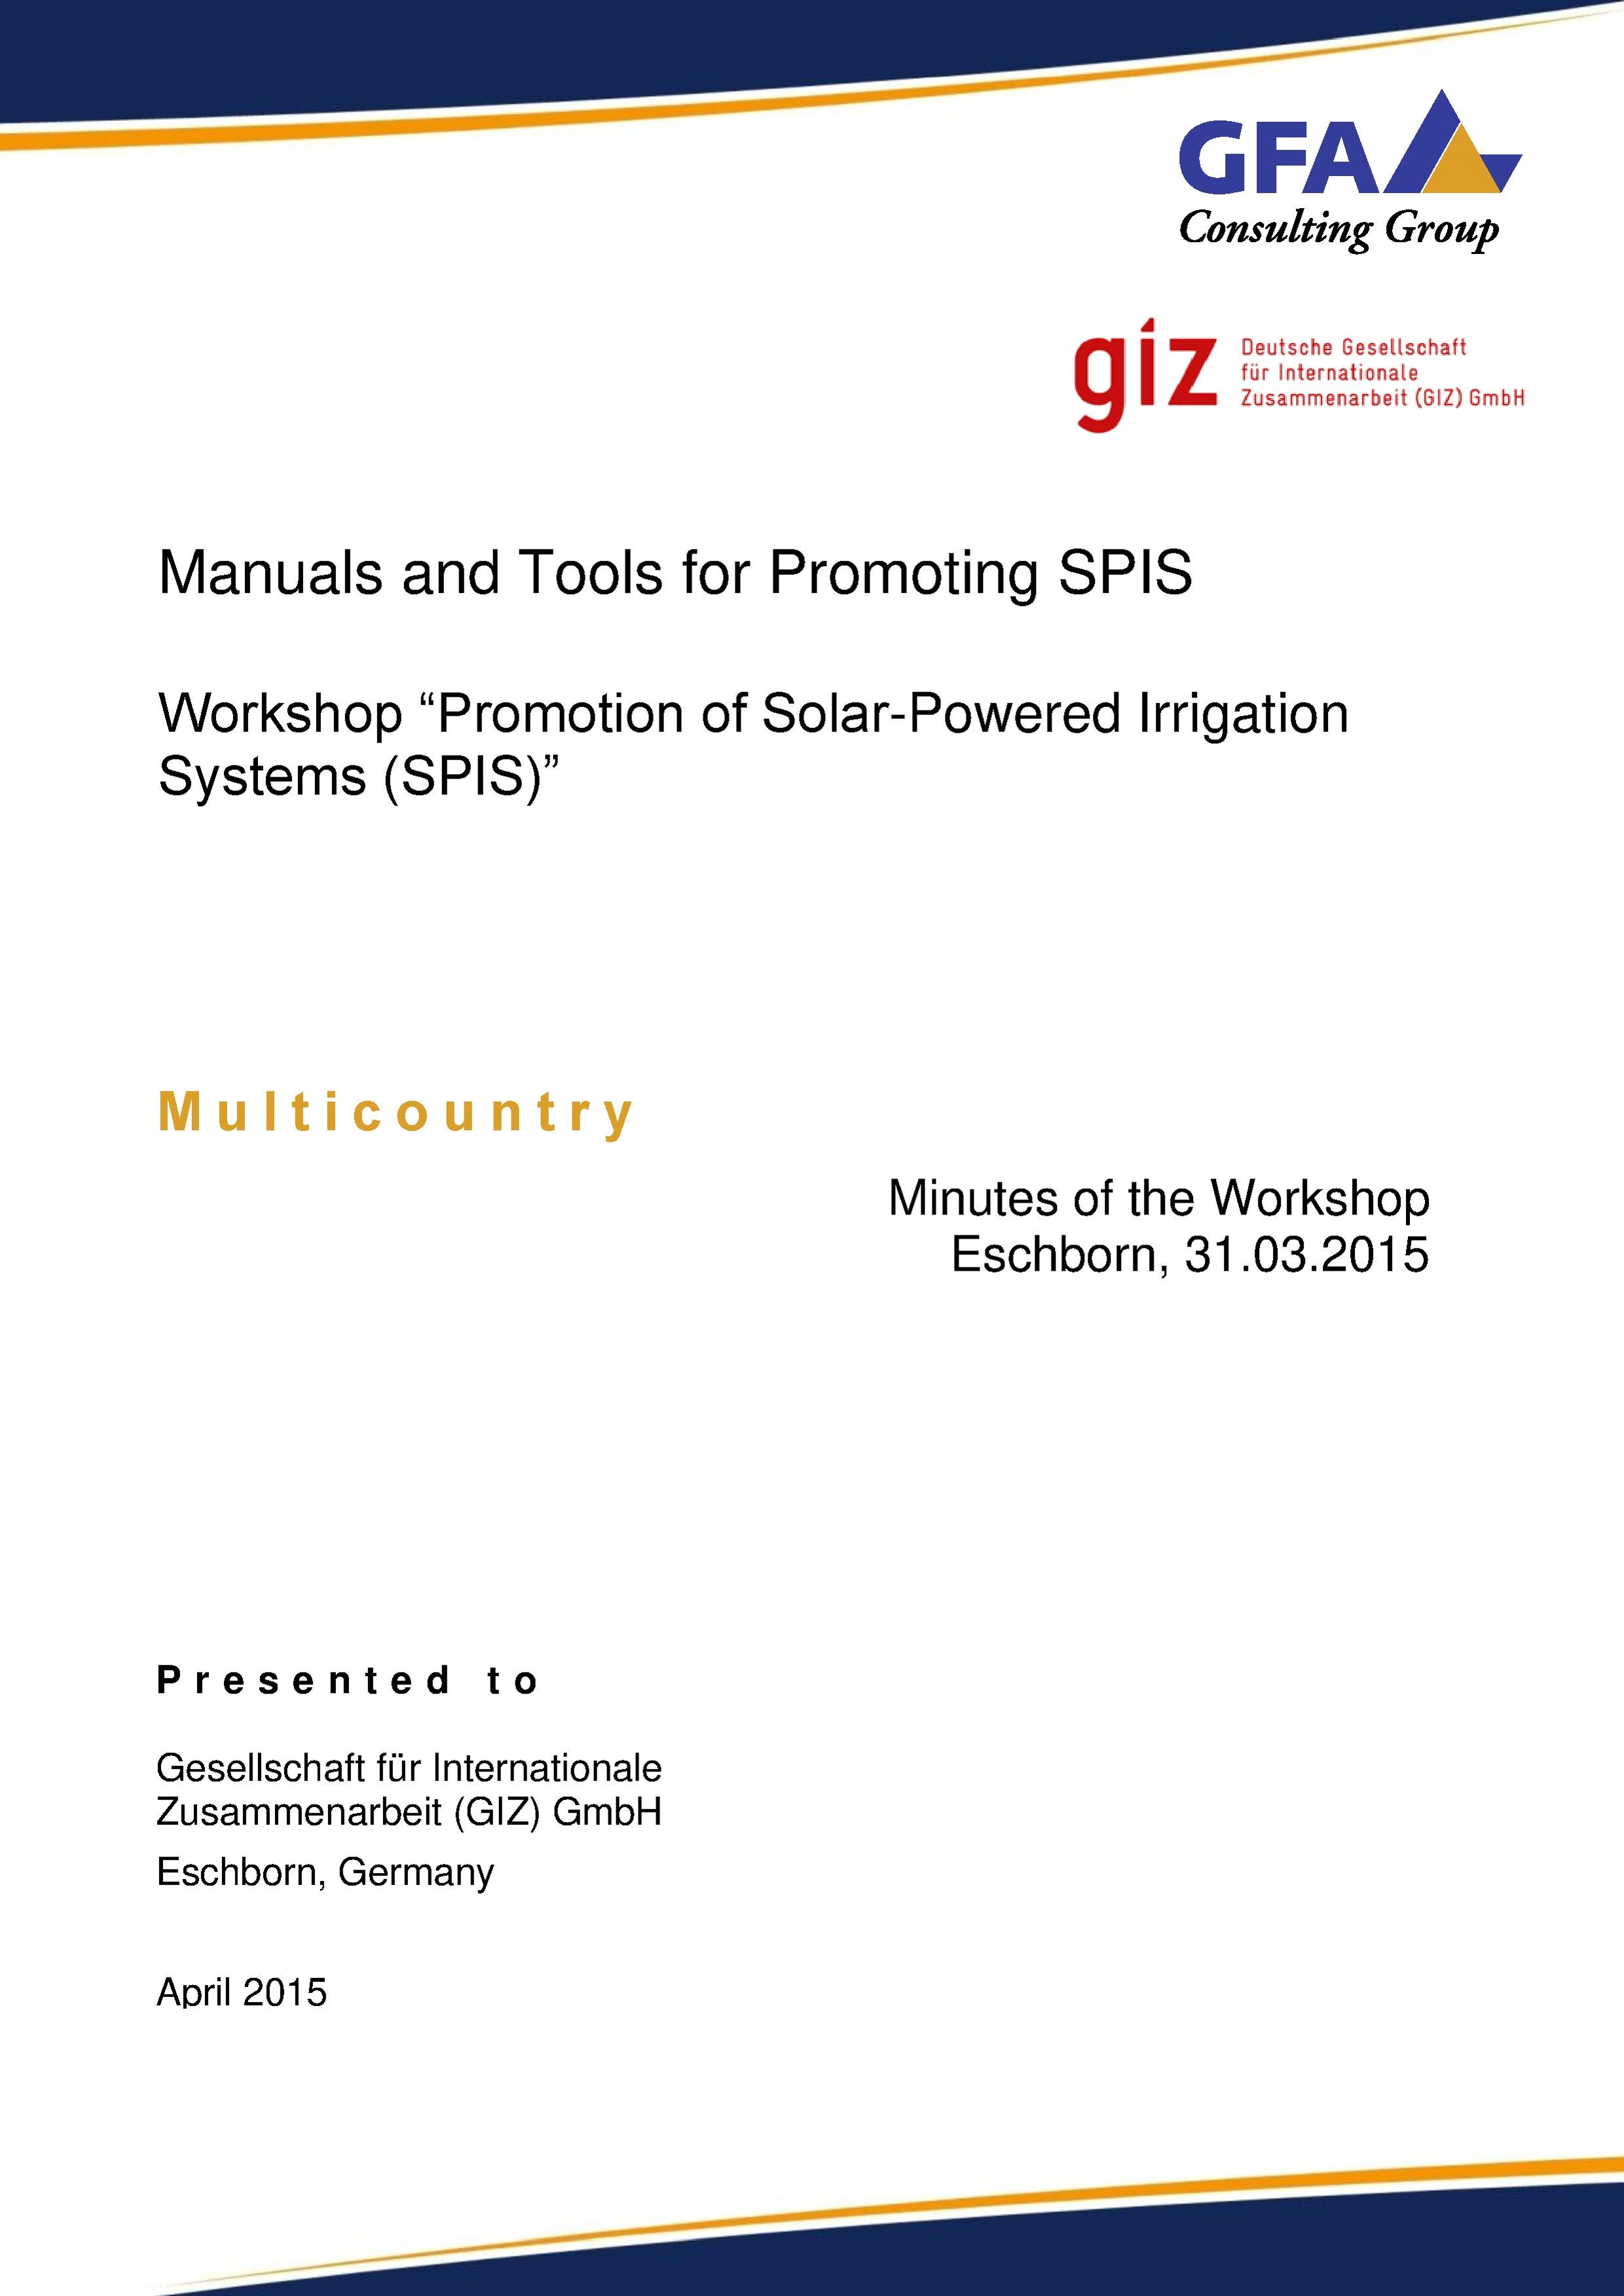 Manuals and Tools for Promoting SPIS - Minutes of the Workshop